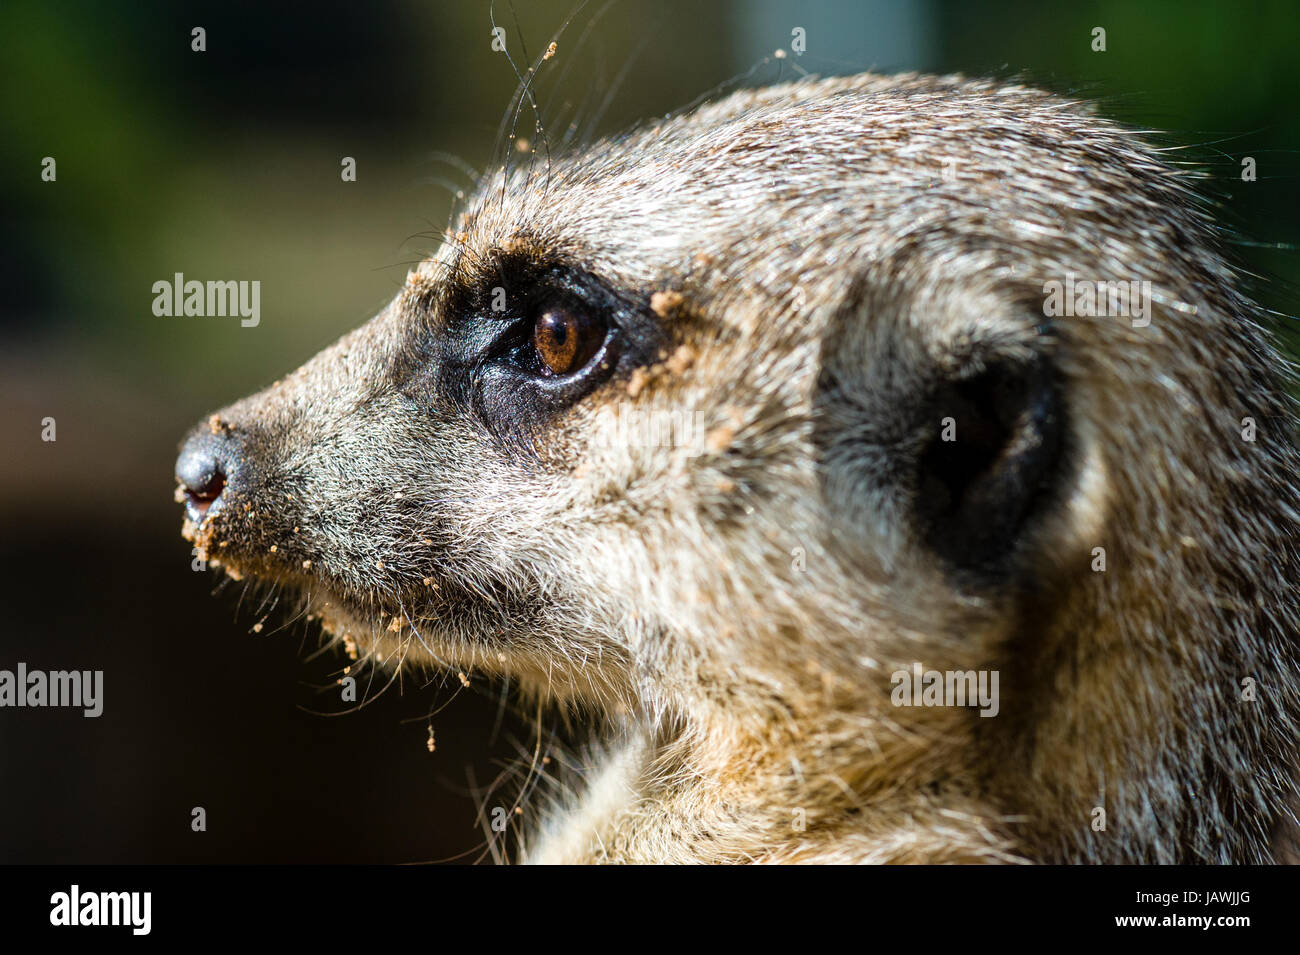 The eye of a Meerkat focussed on something in the distance. Stock Photo